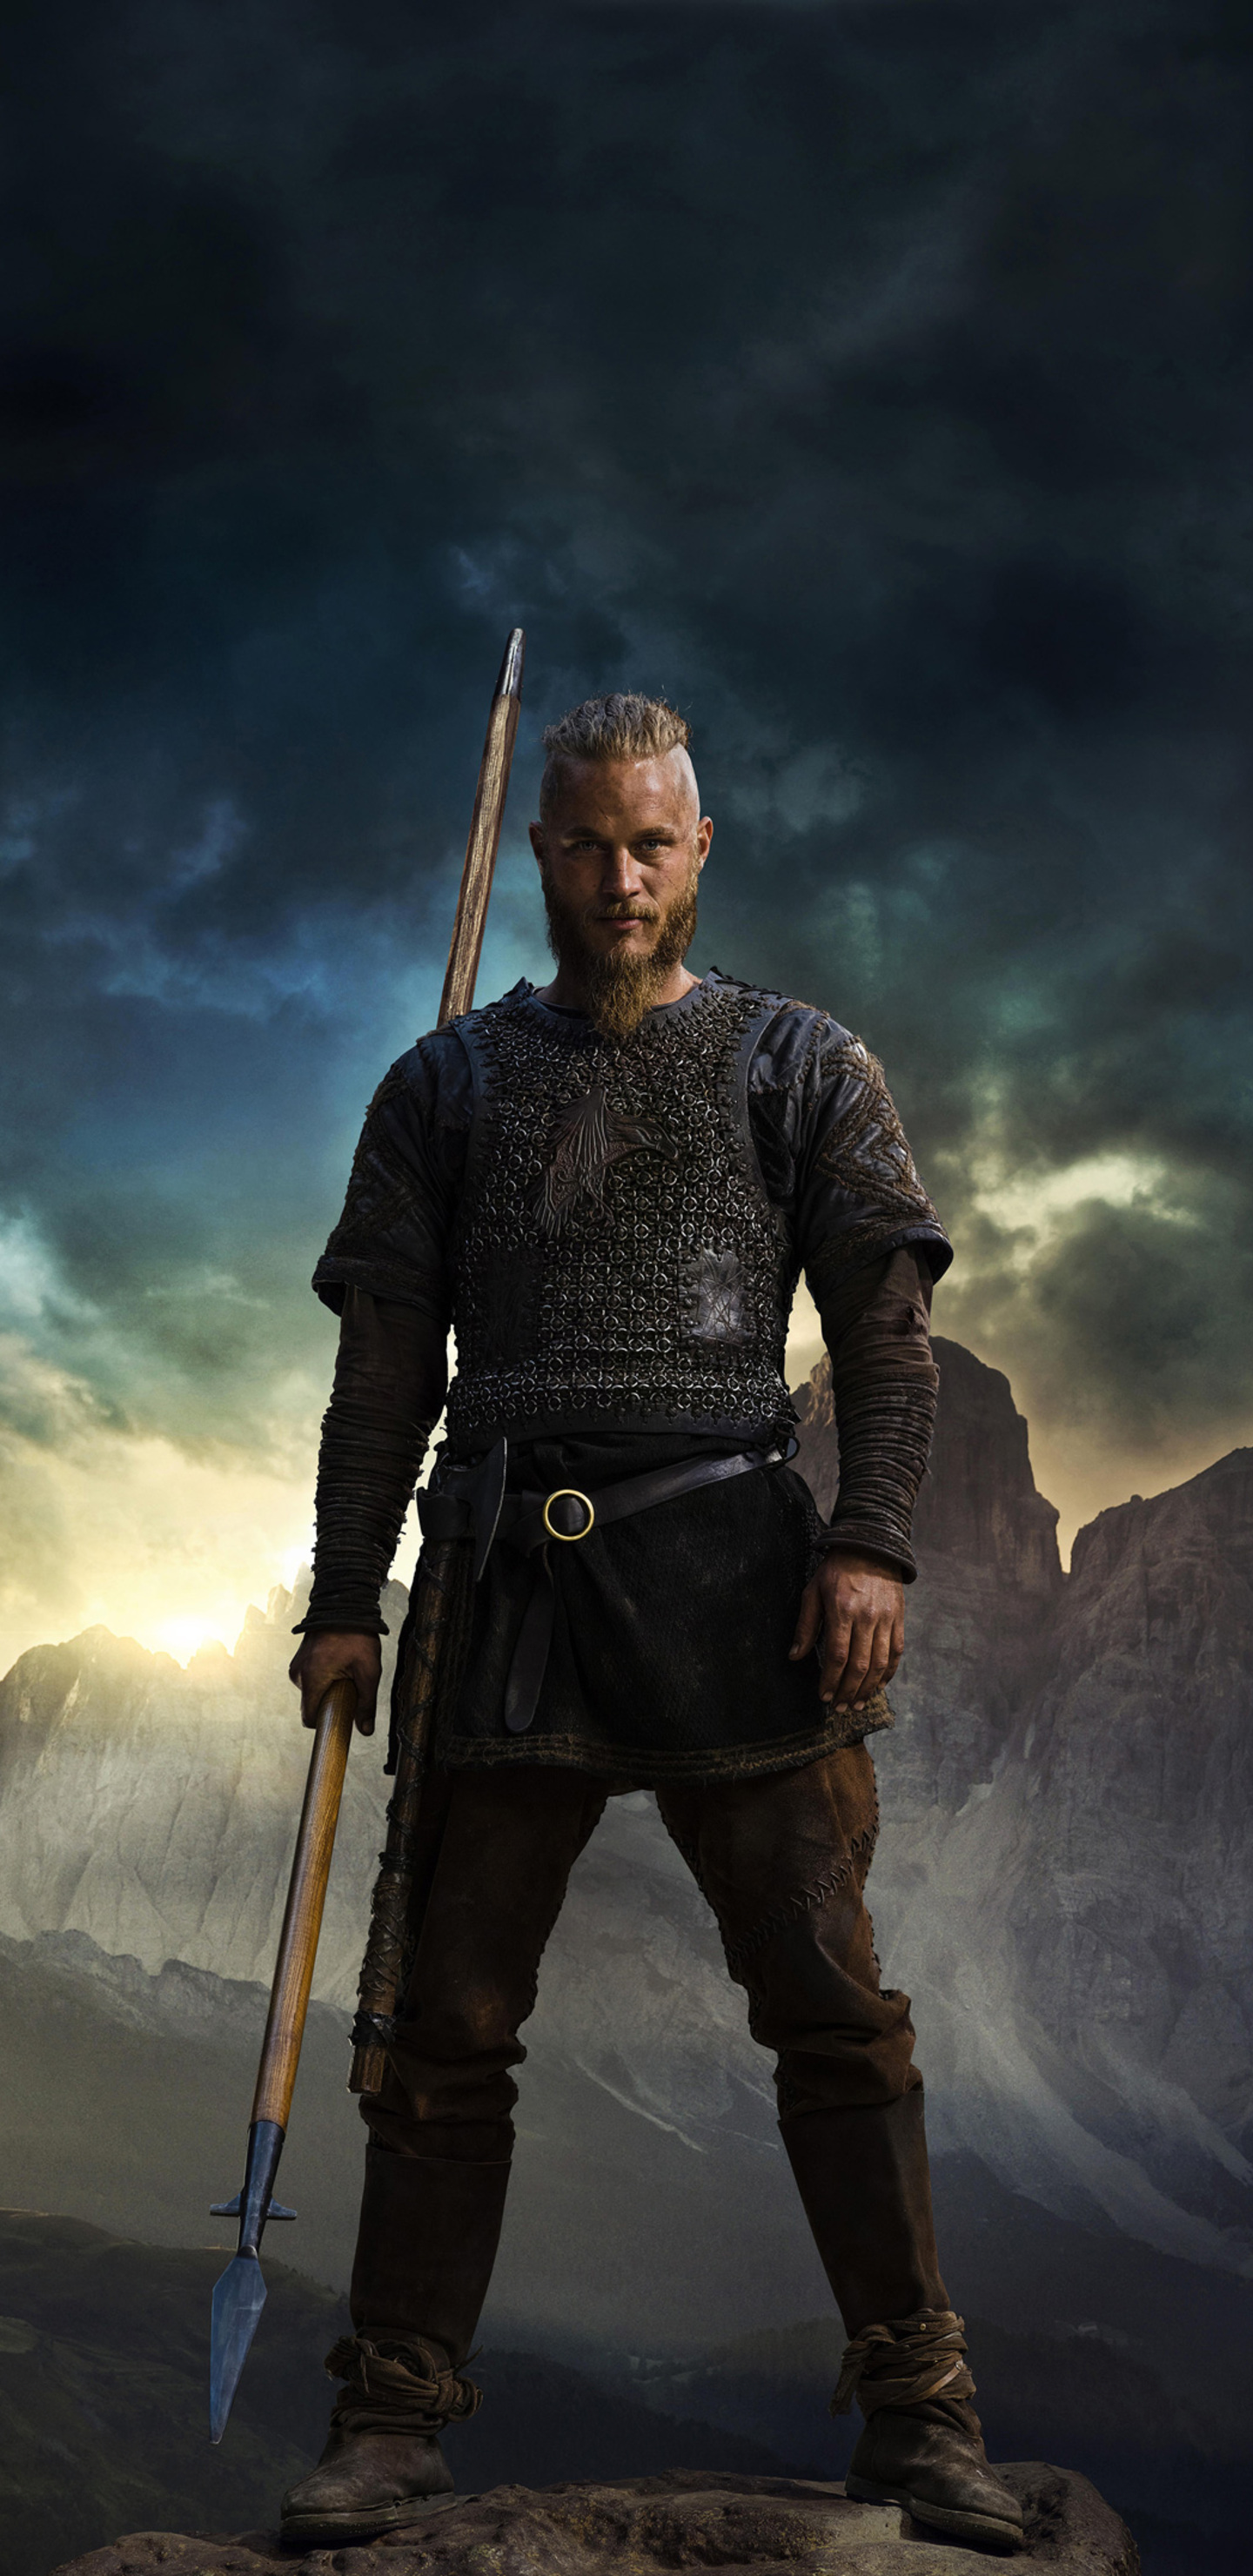 Vikings Ragnar 4k Samsung Galaxy Note S S SQHD HD 4k Wallpaper, Image, Background, Photo and Picture